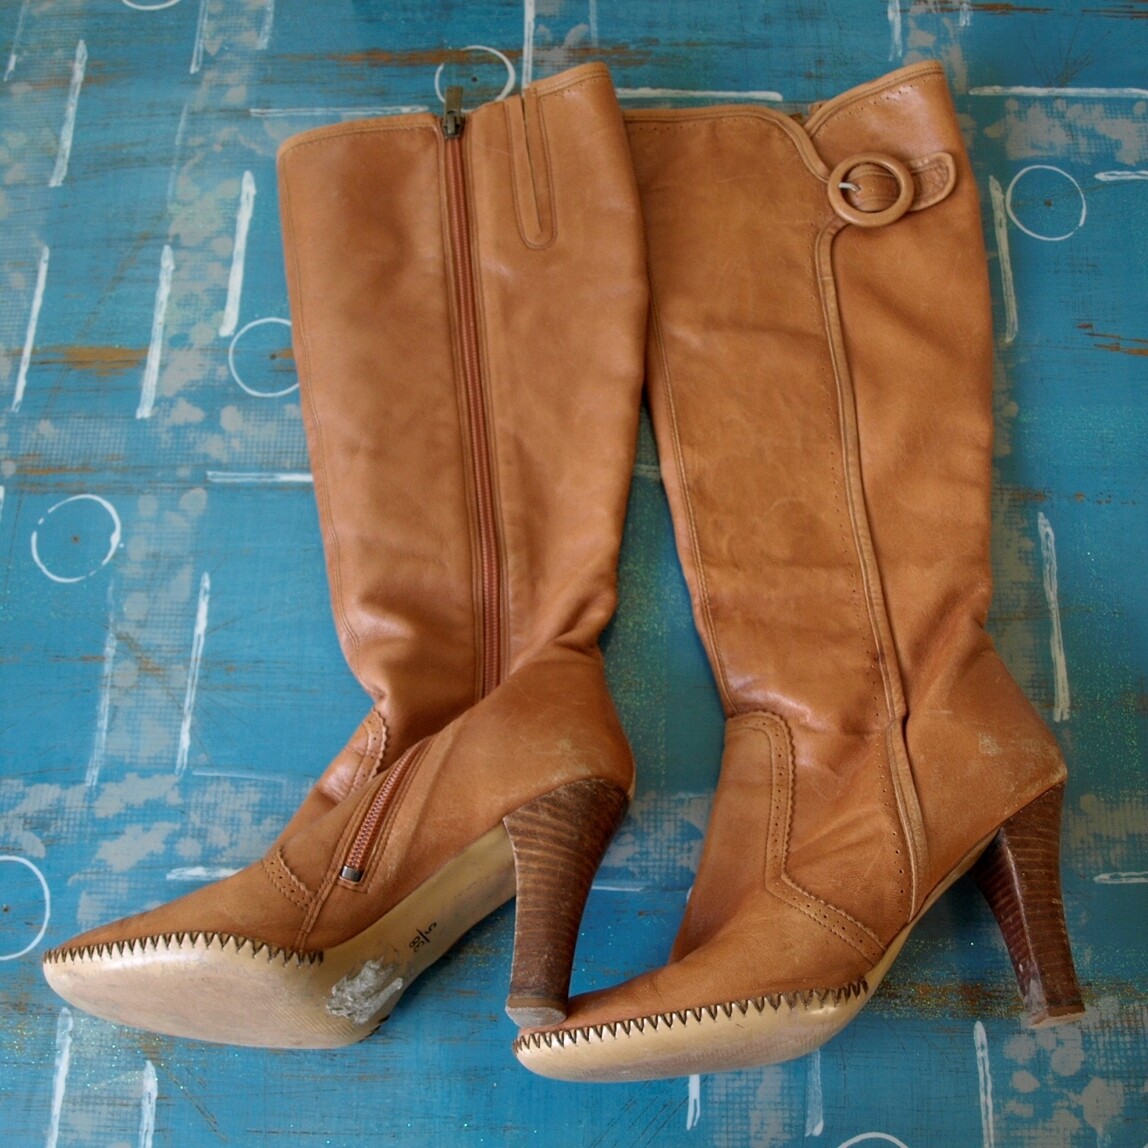 Ladies High Heel Tan Leather Next Boots Size 5 Wide Fit